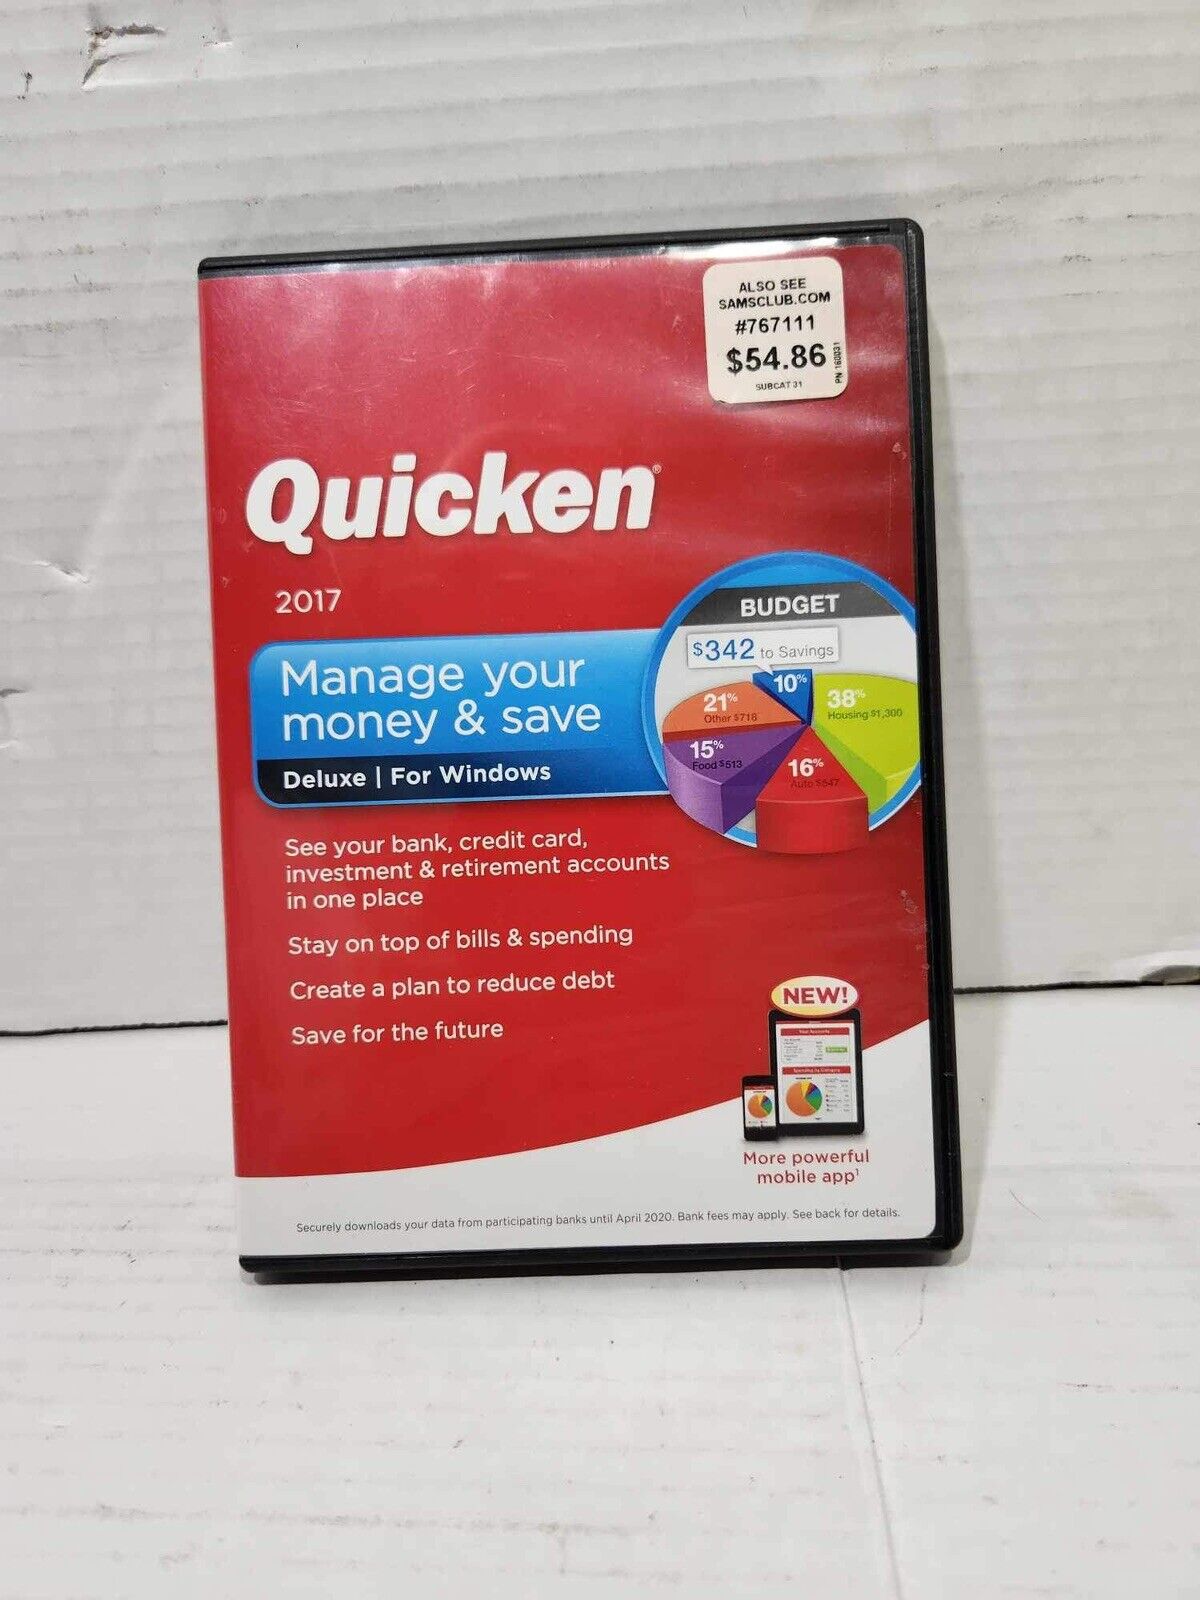 Quicken Deluxe  2017 Manage Your Money and Save For Windows.